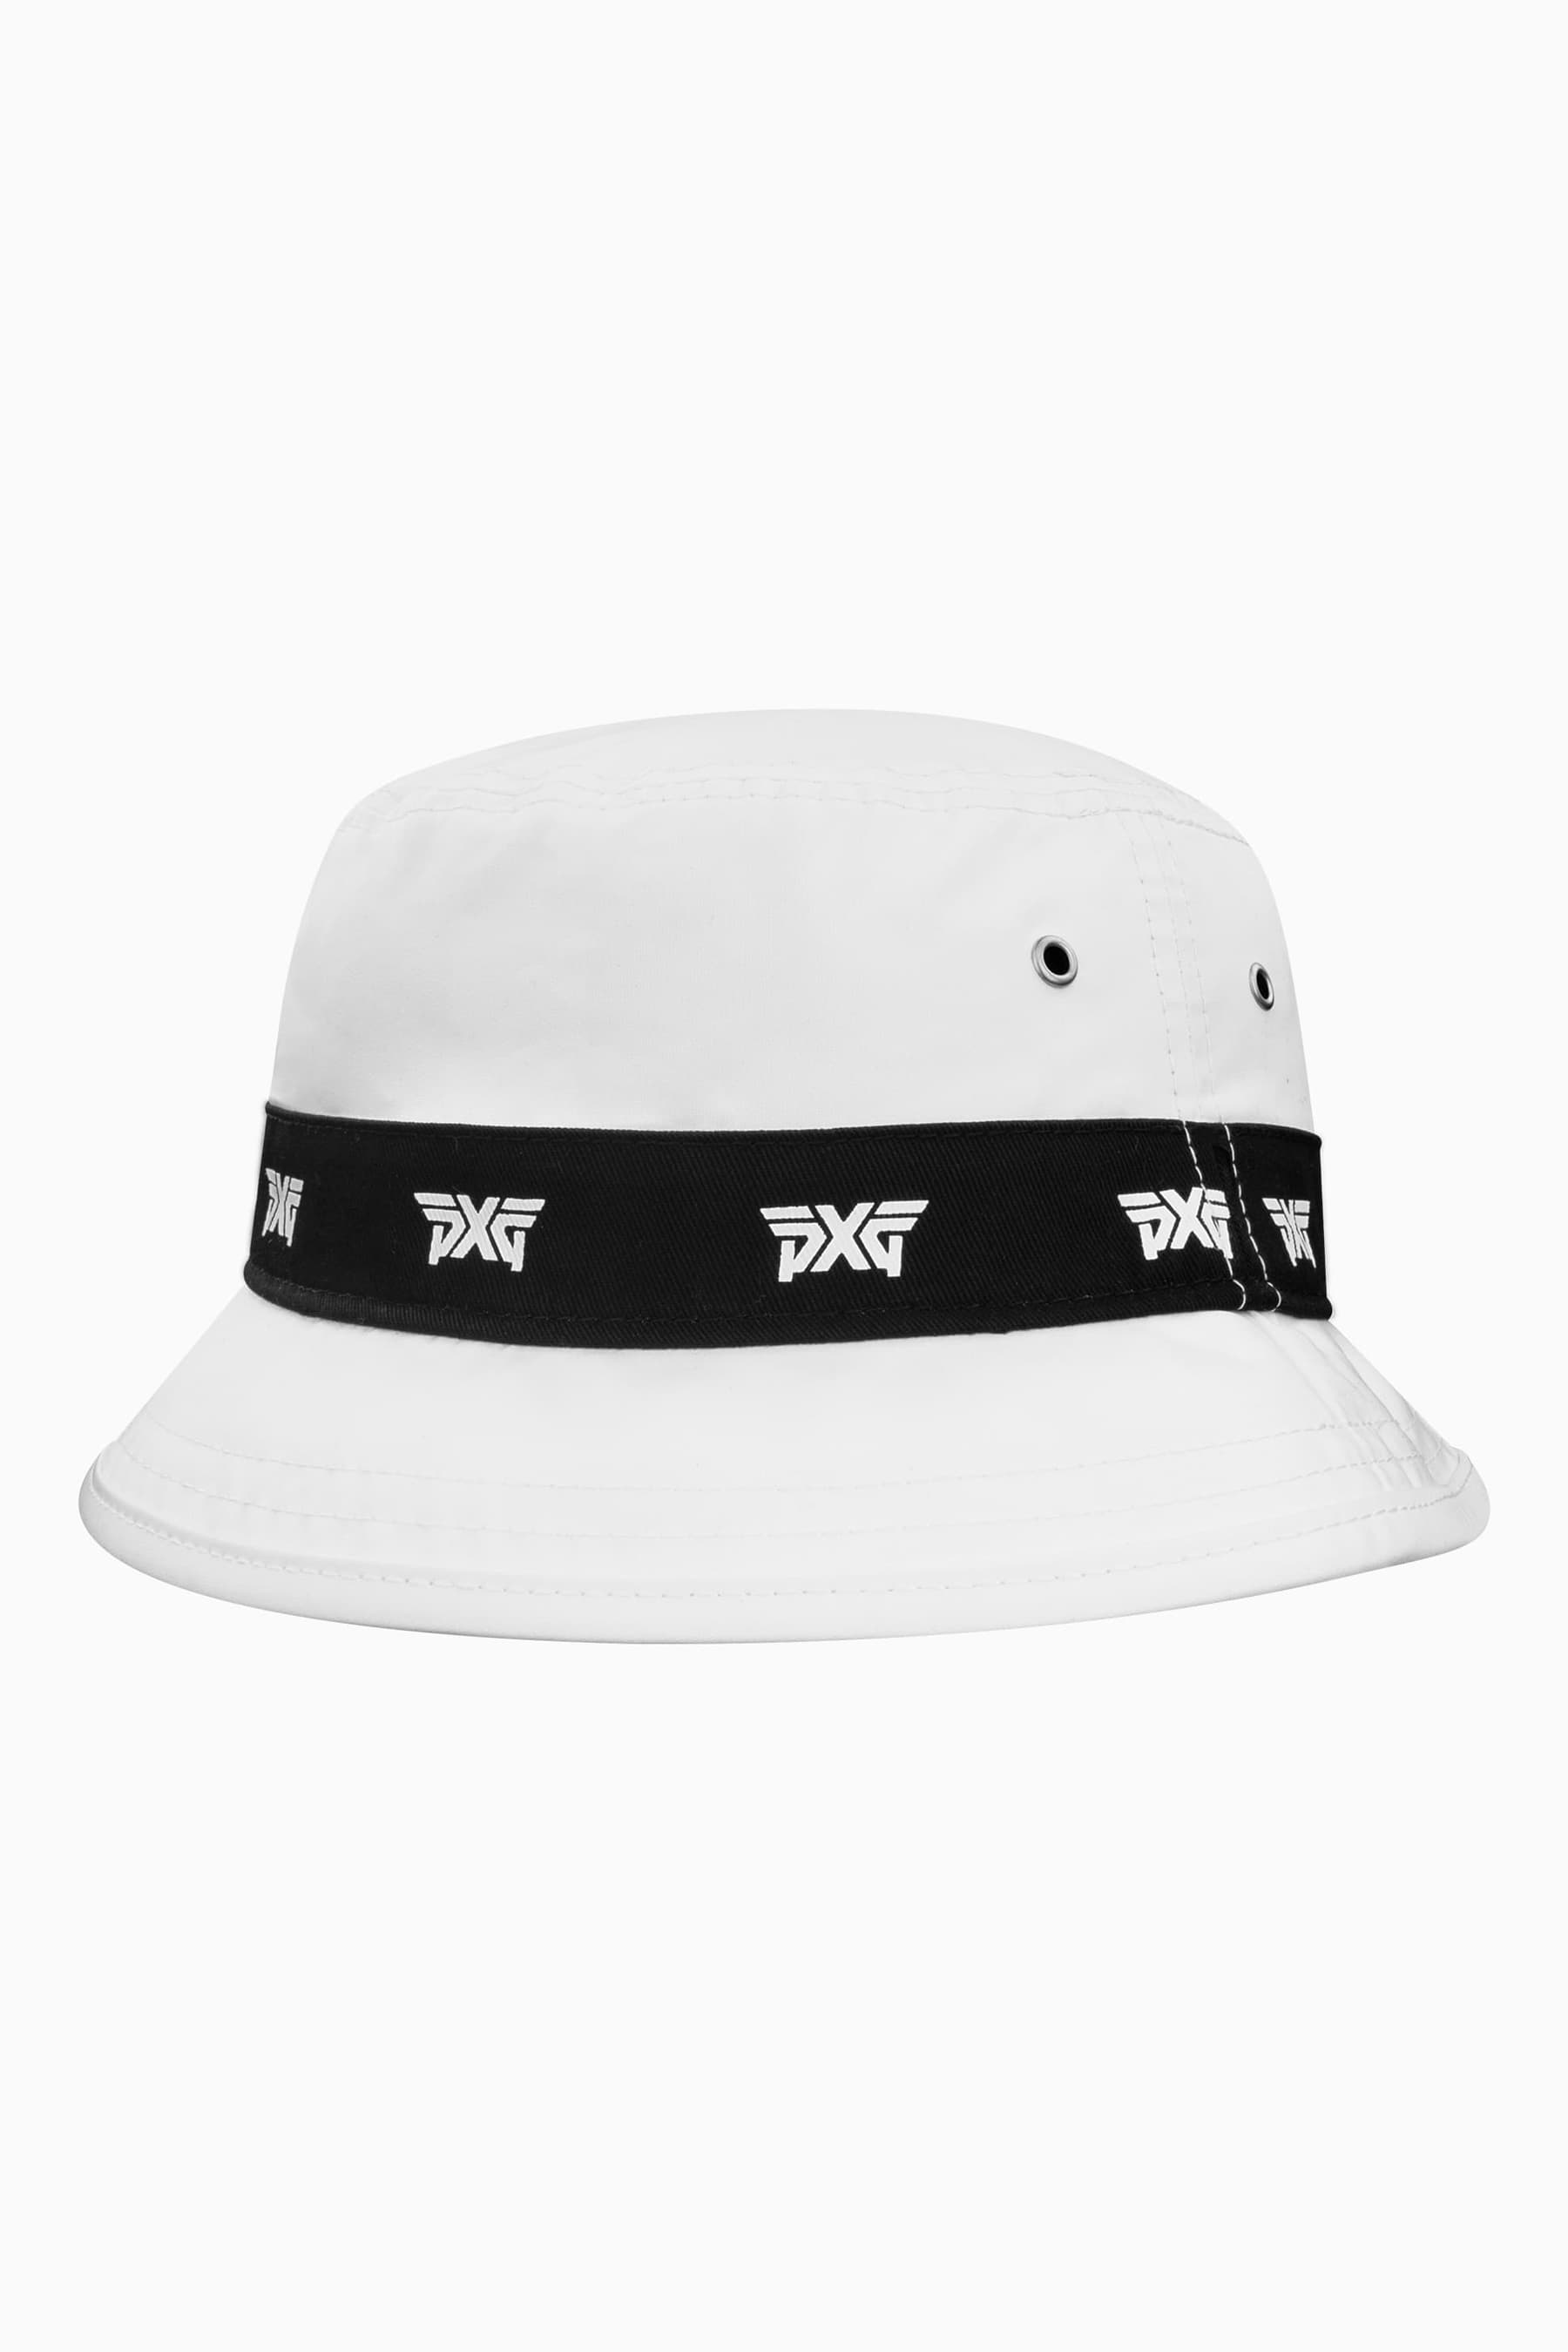 Echtheitsgarantie! Logo Repeat Bucket Hat | Golf PXG and the Apparel, Gear, Golf Shop Quality Accessories at Highest Clubs